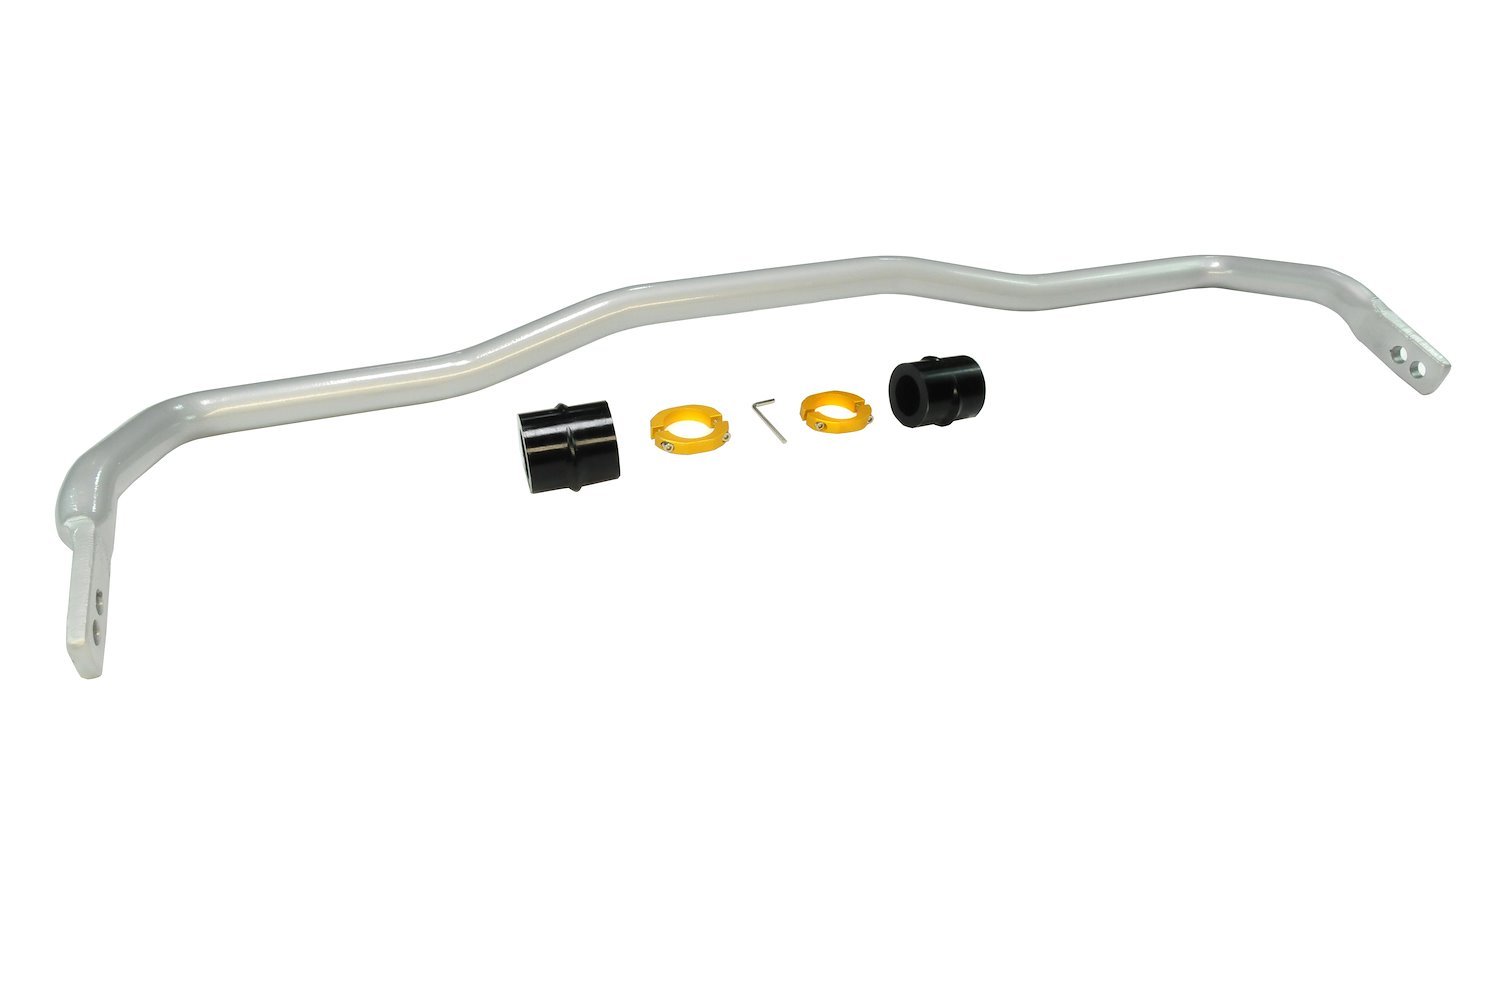 BCF12Z Front Heavy Duty Adjustable 32 mm Sway Bar for 2008-2020 Dodge Challenger Gen III, 2006-2020 Charger LX